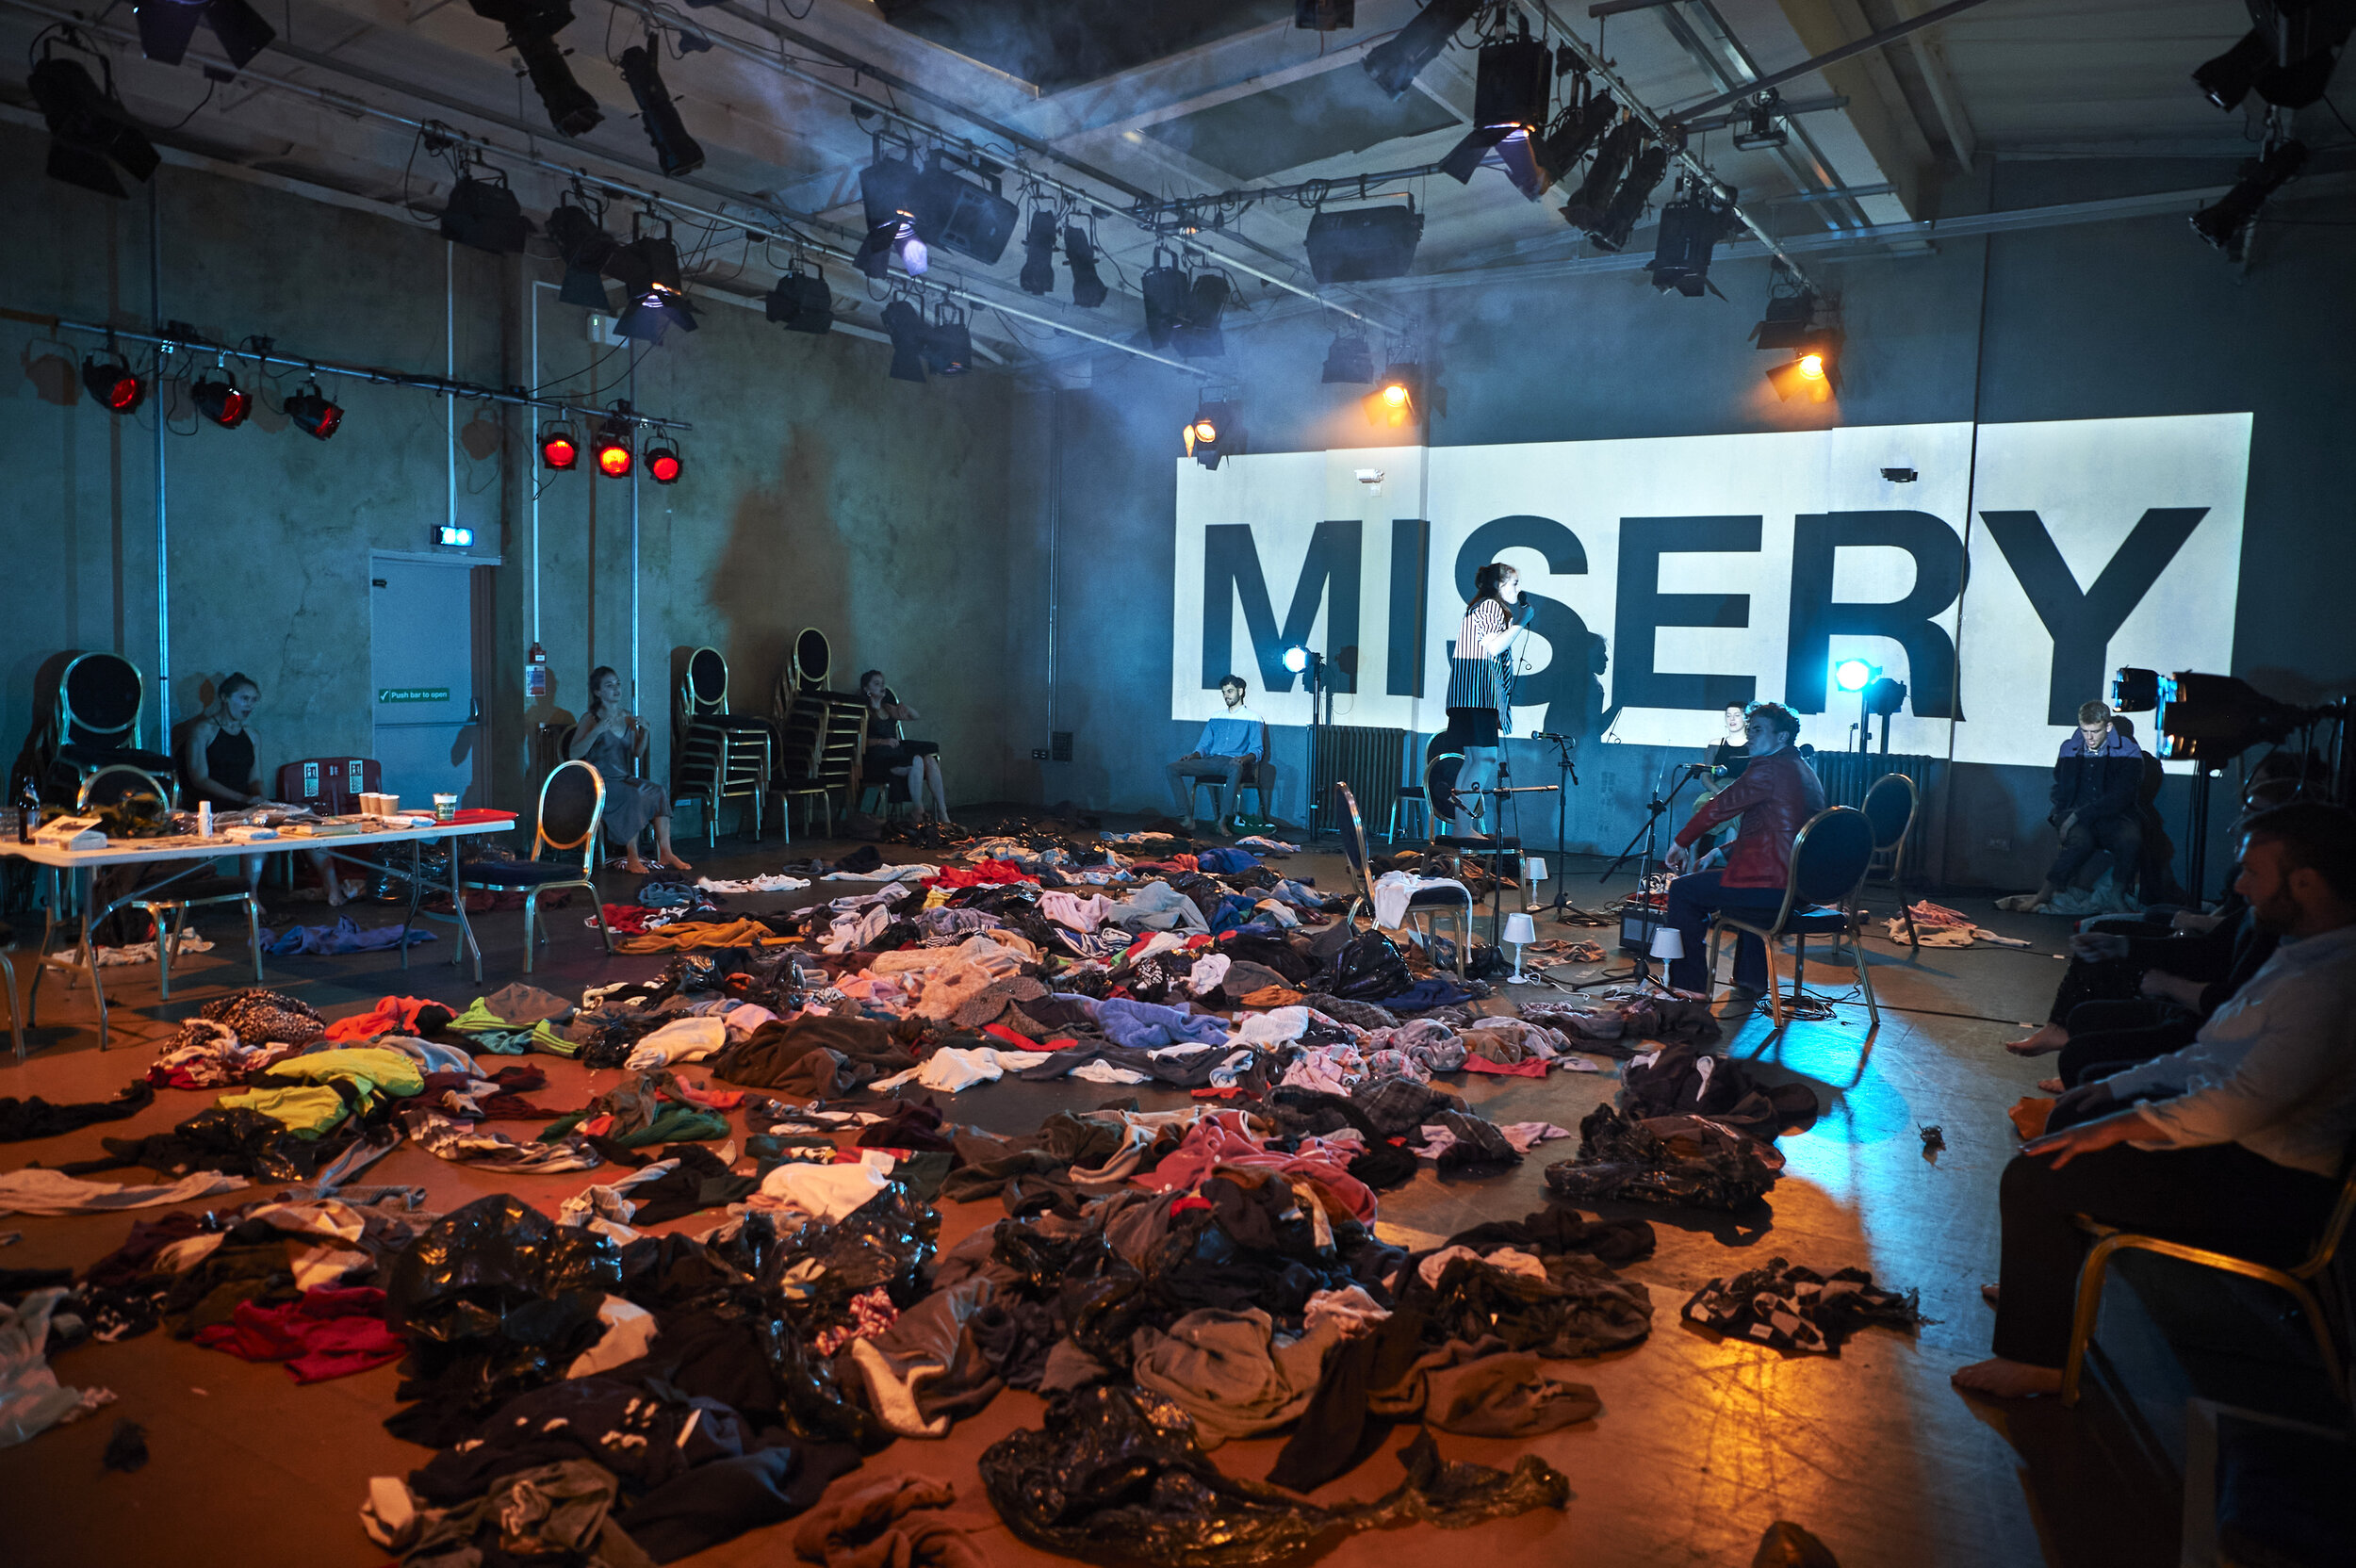   Fear and Misery of the Third Reich  / Oxford School of Drama / Playground Theatre, London / July 2020  Written by  Bertolt Brecht   Designed by  Rosanna Vize   Lighting by  Joe Hornsby   Sound by  Nicola Chang   Video Design by  Jack Baxter   Produ